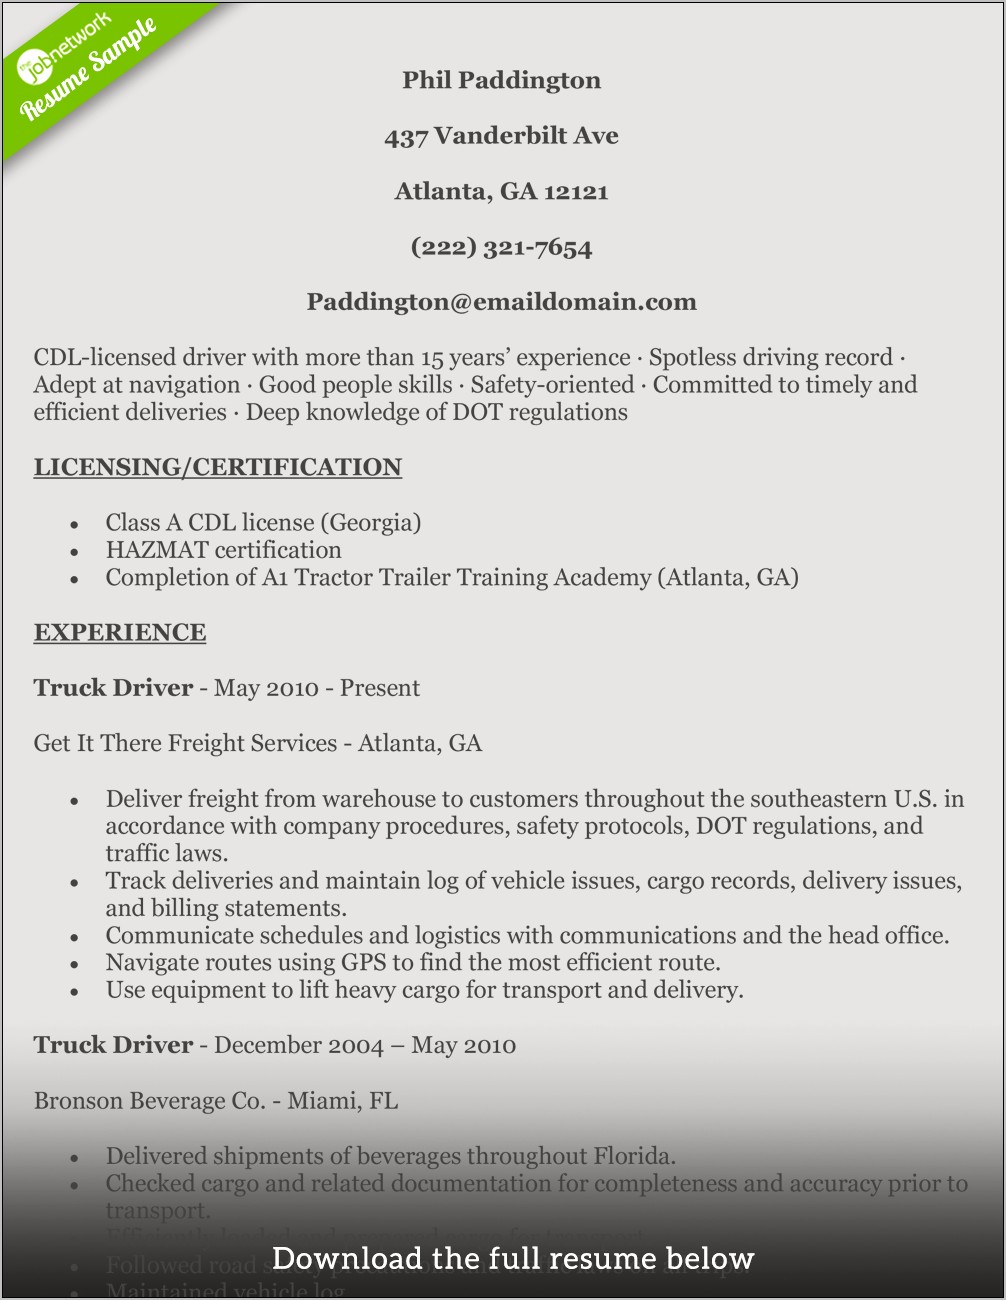 Resume Objective For Truck Dispatcher Position